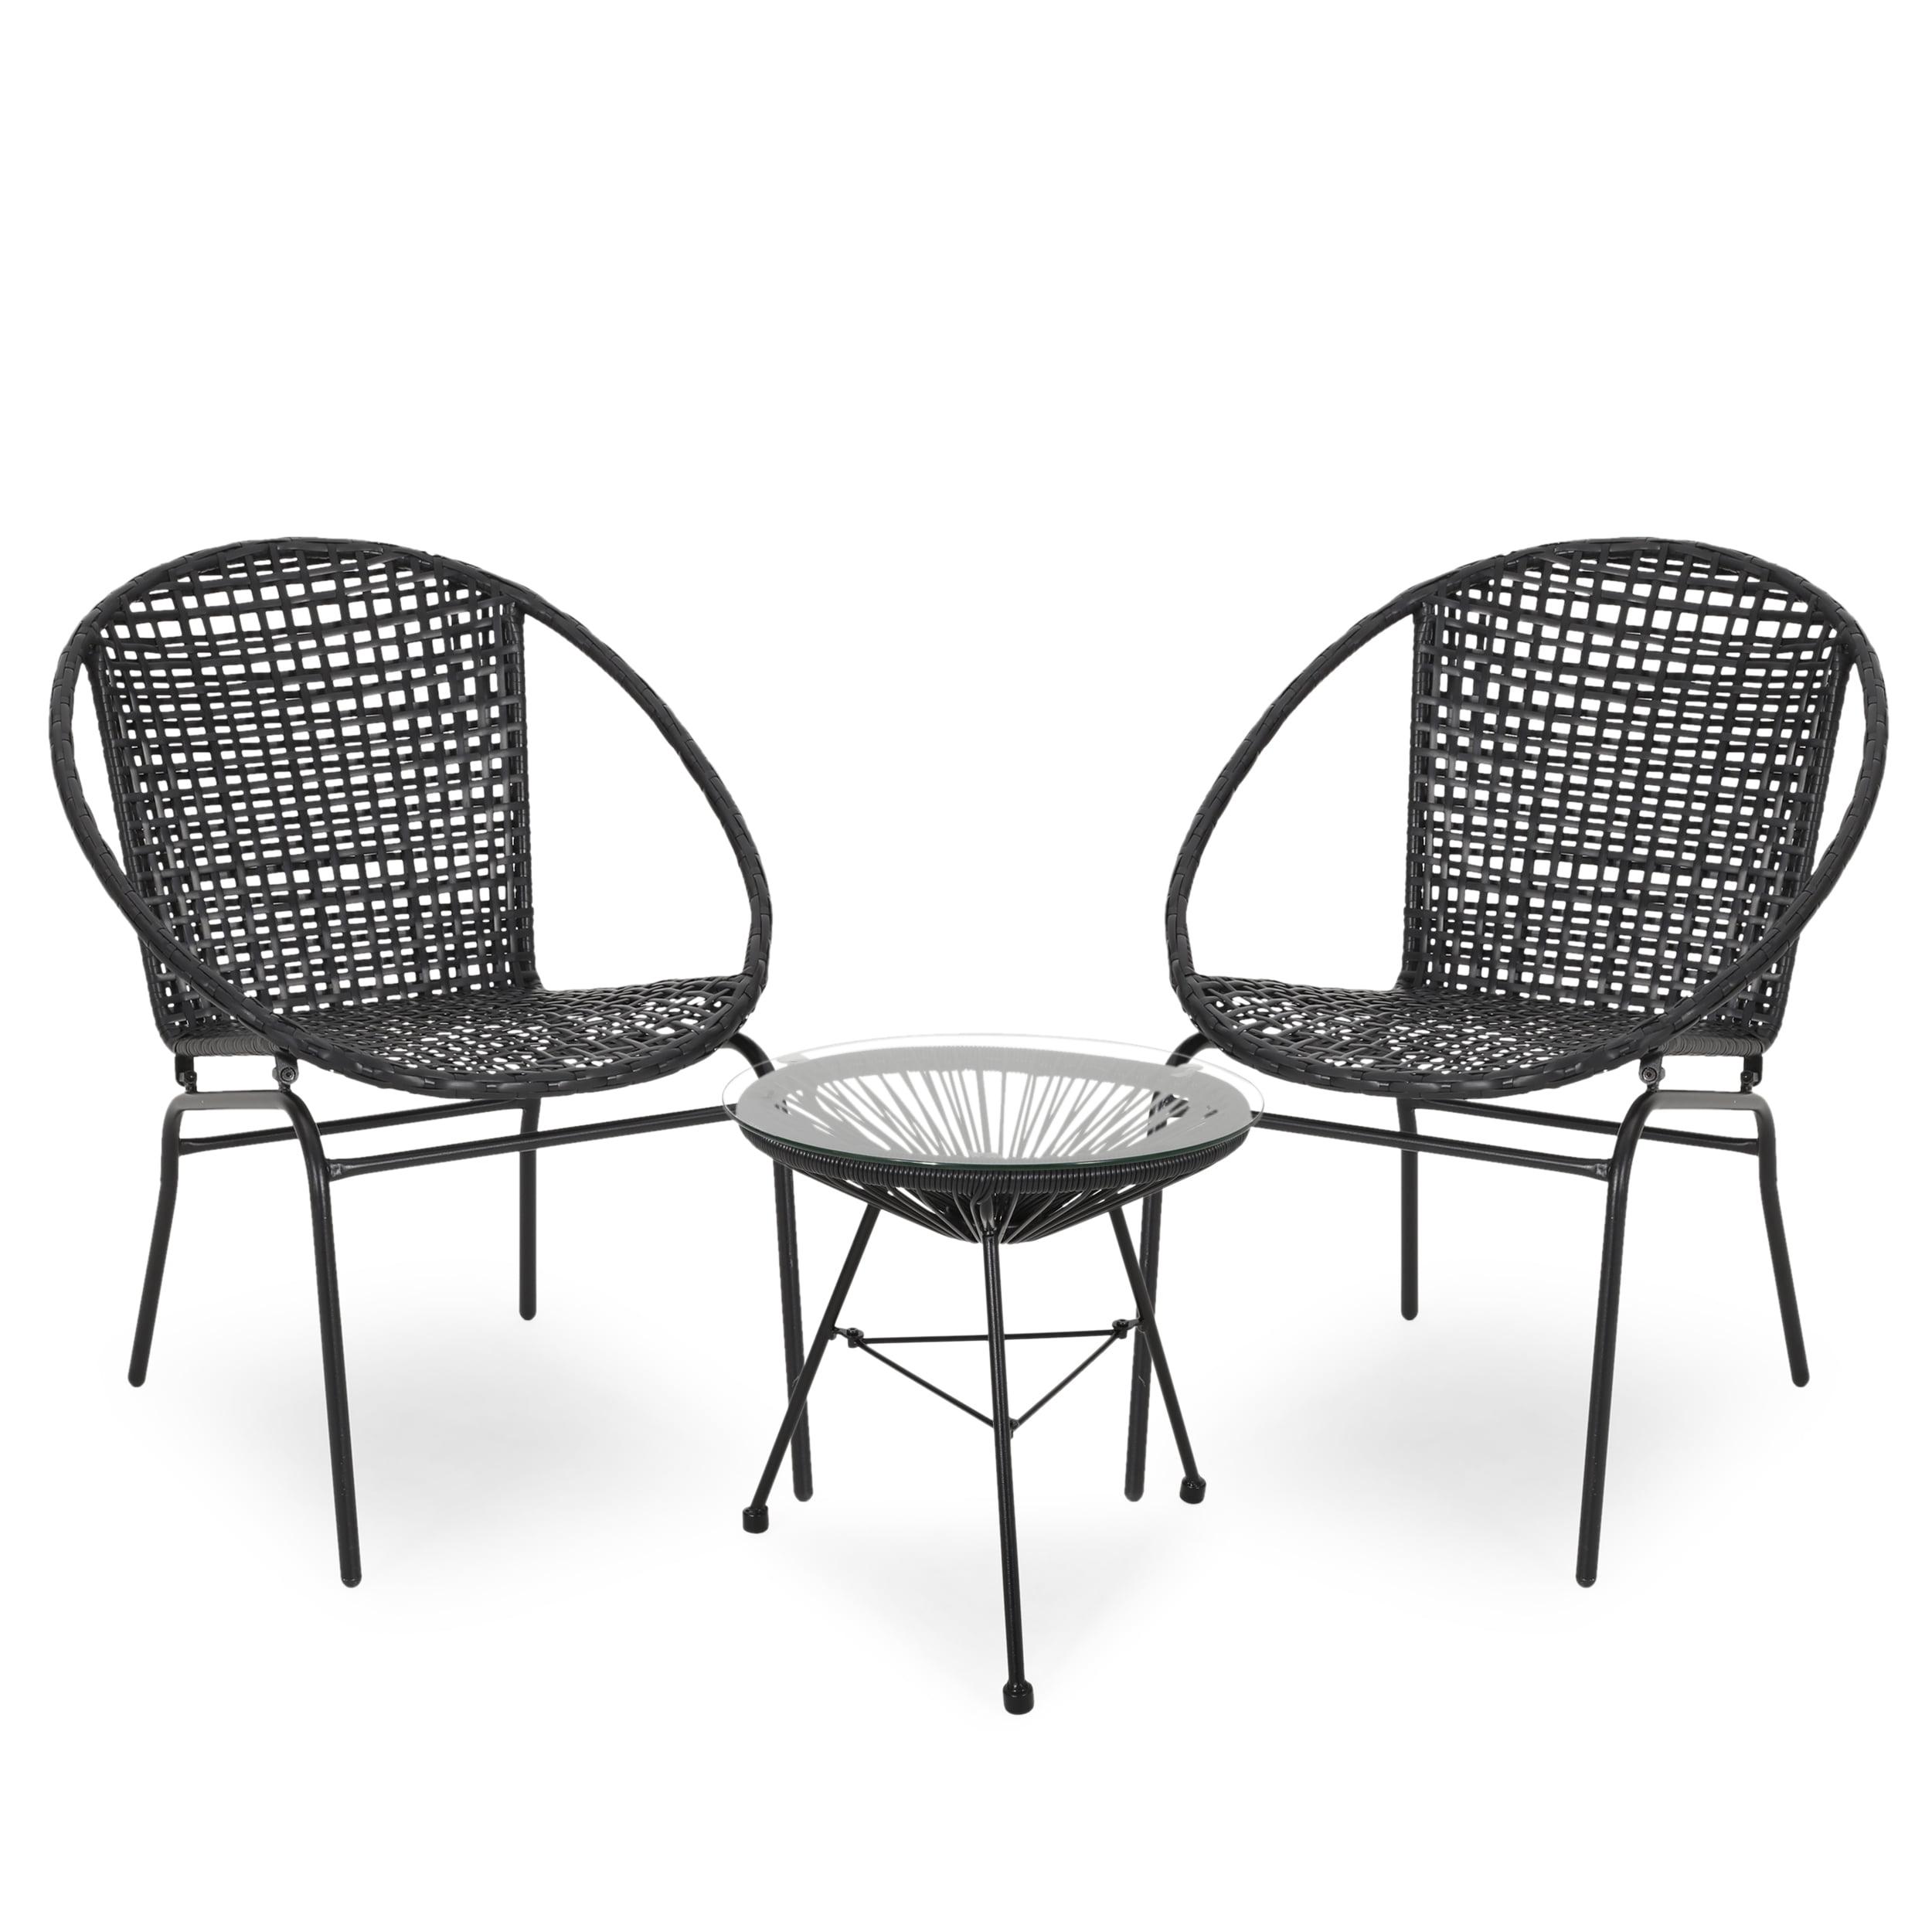 Modern 2-Person Black Iron & Faux Rattan Outdoor Chat Set